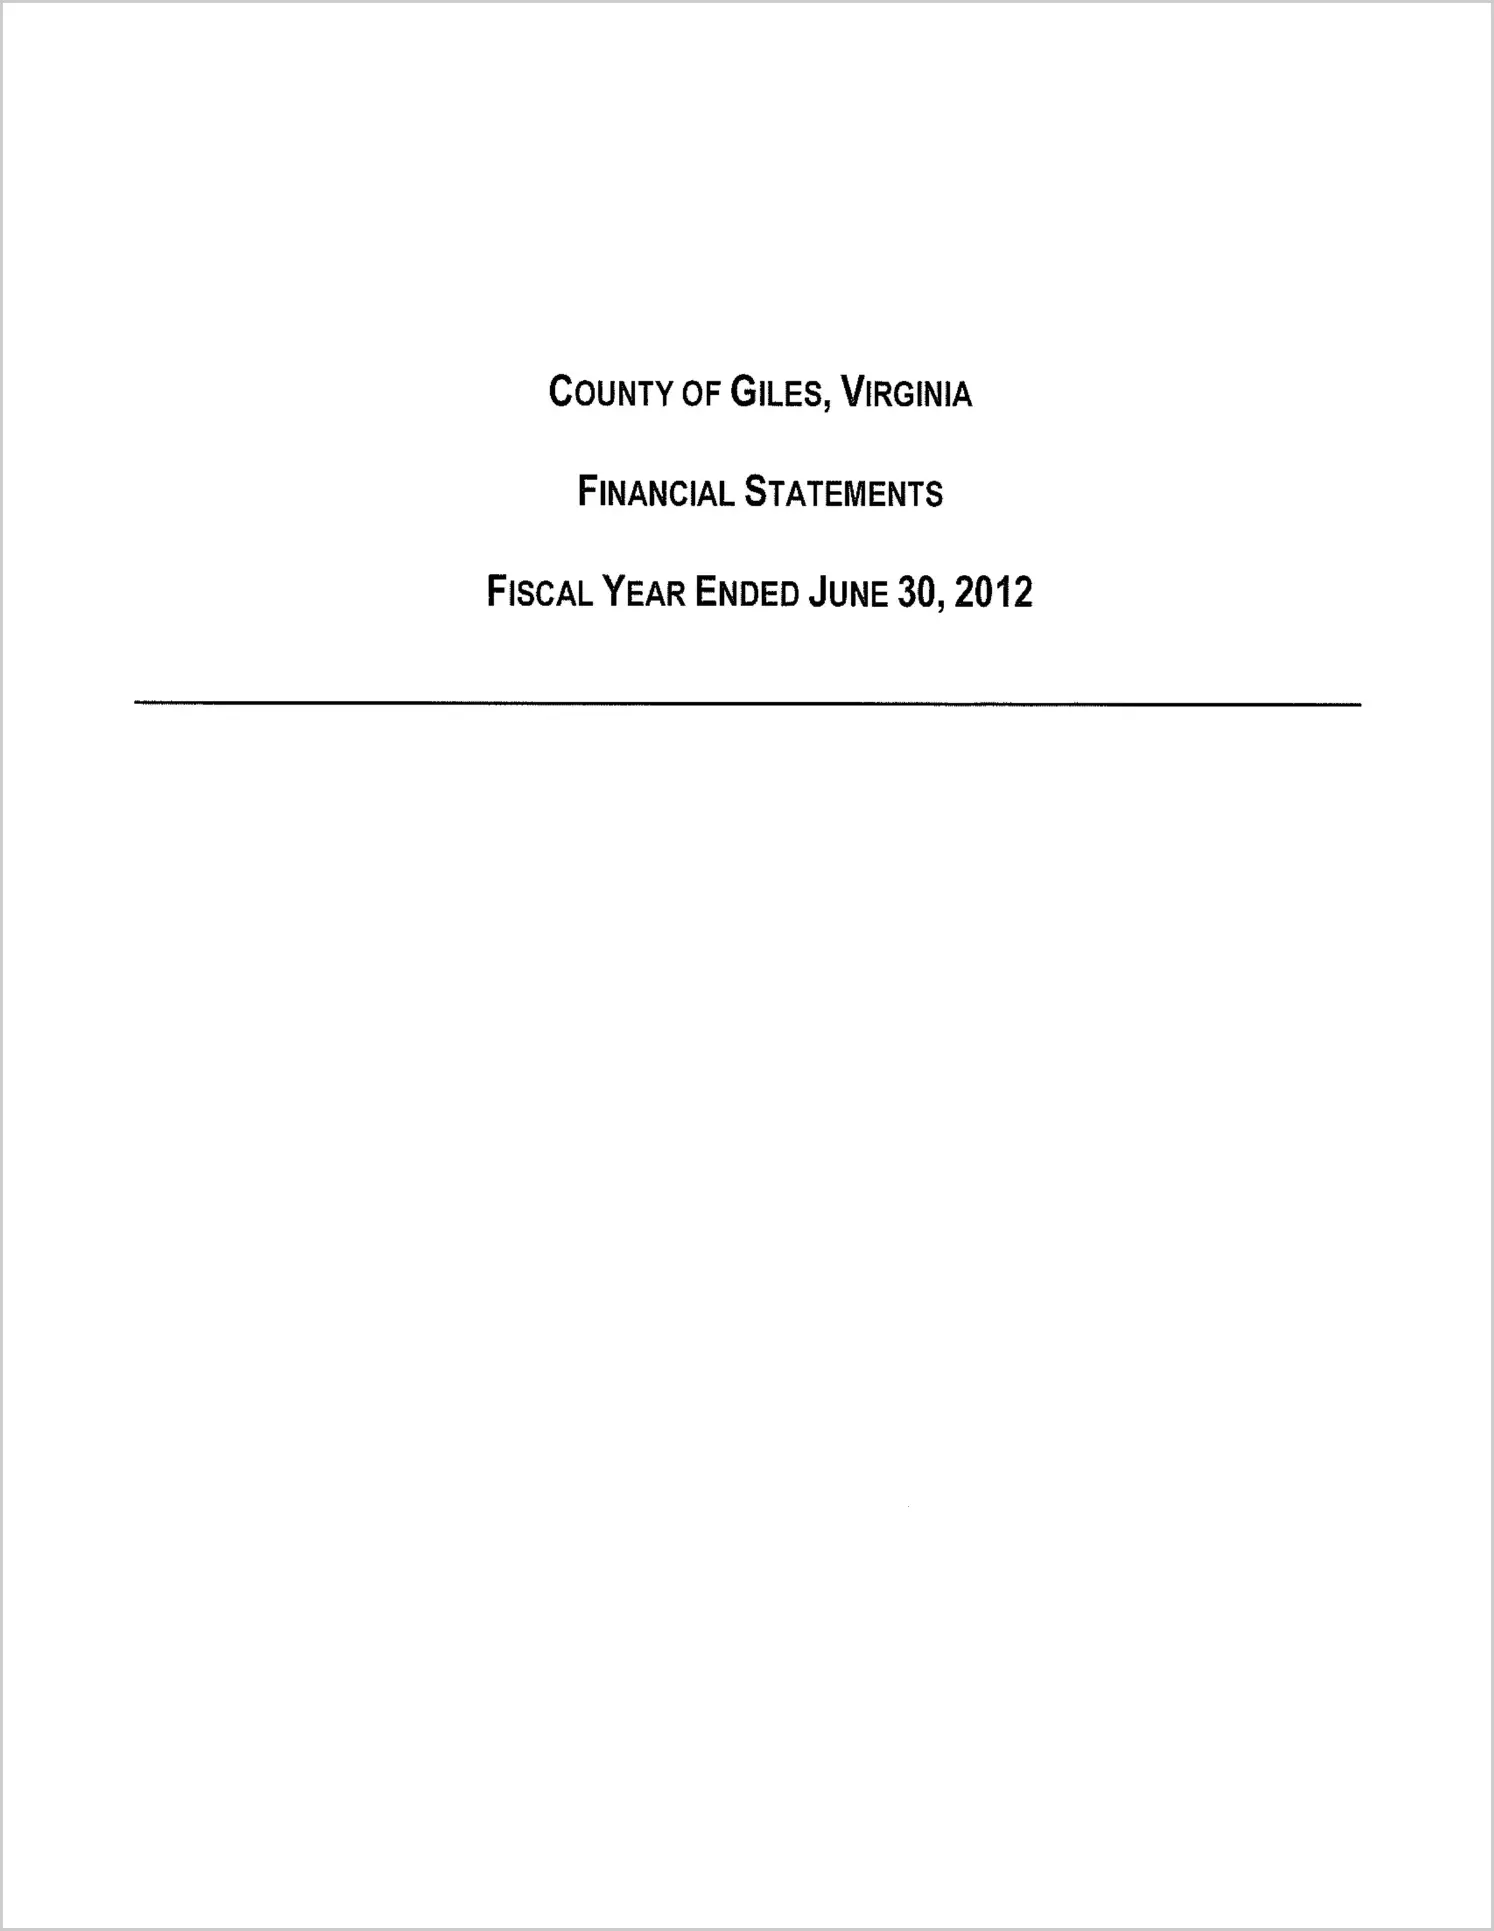 2012 Annual Financial Report for County of Giles